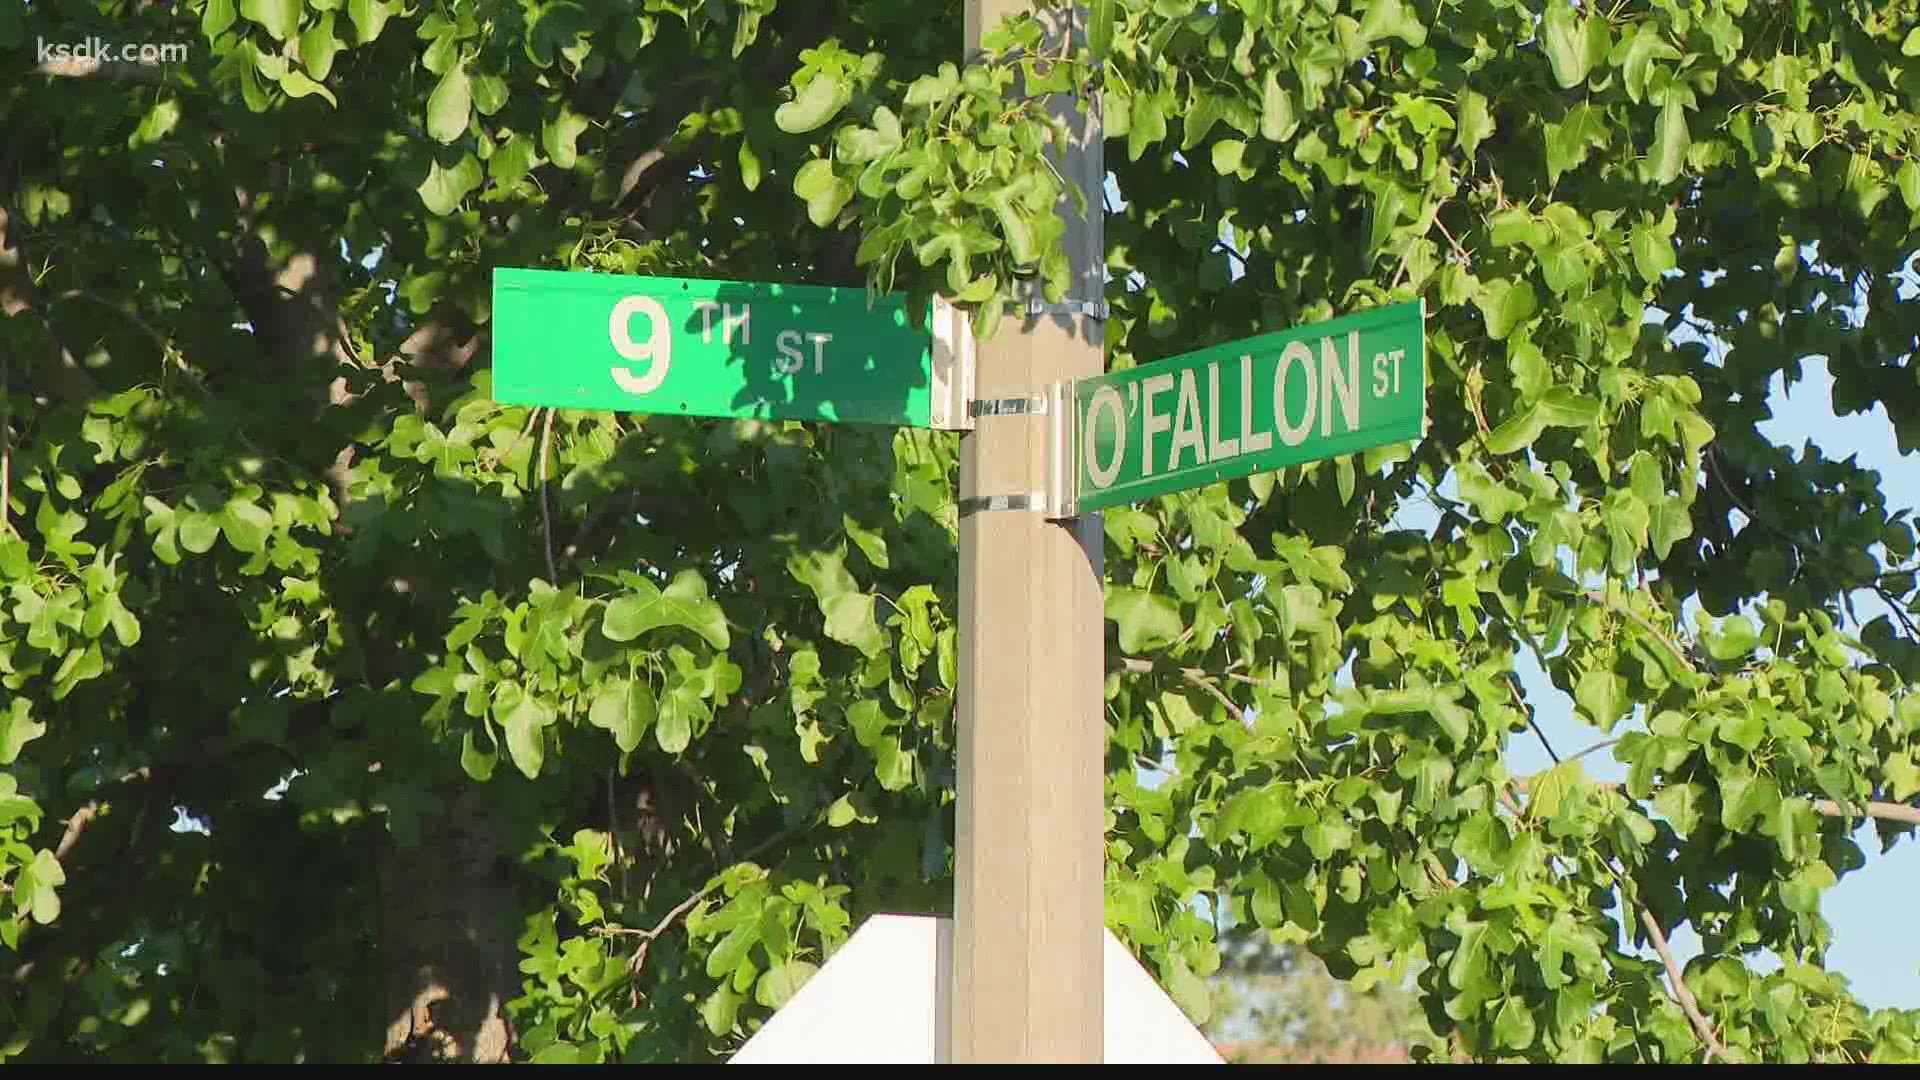 Police said he was taken to a local hospital after being shot in the 900 Block of O'Fallon Street where he was pronounced dead